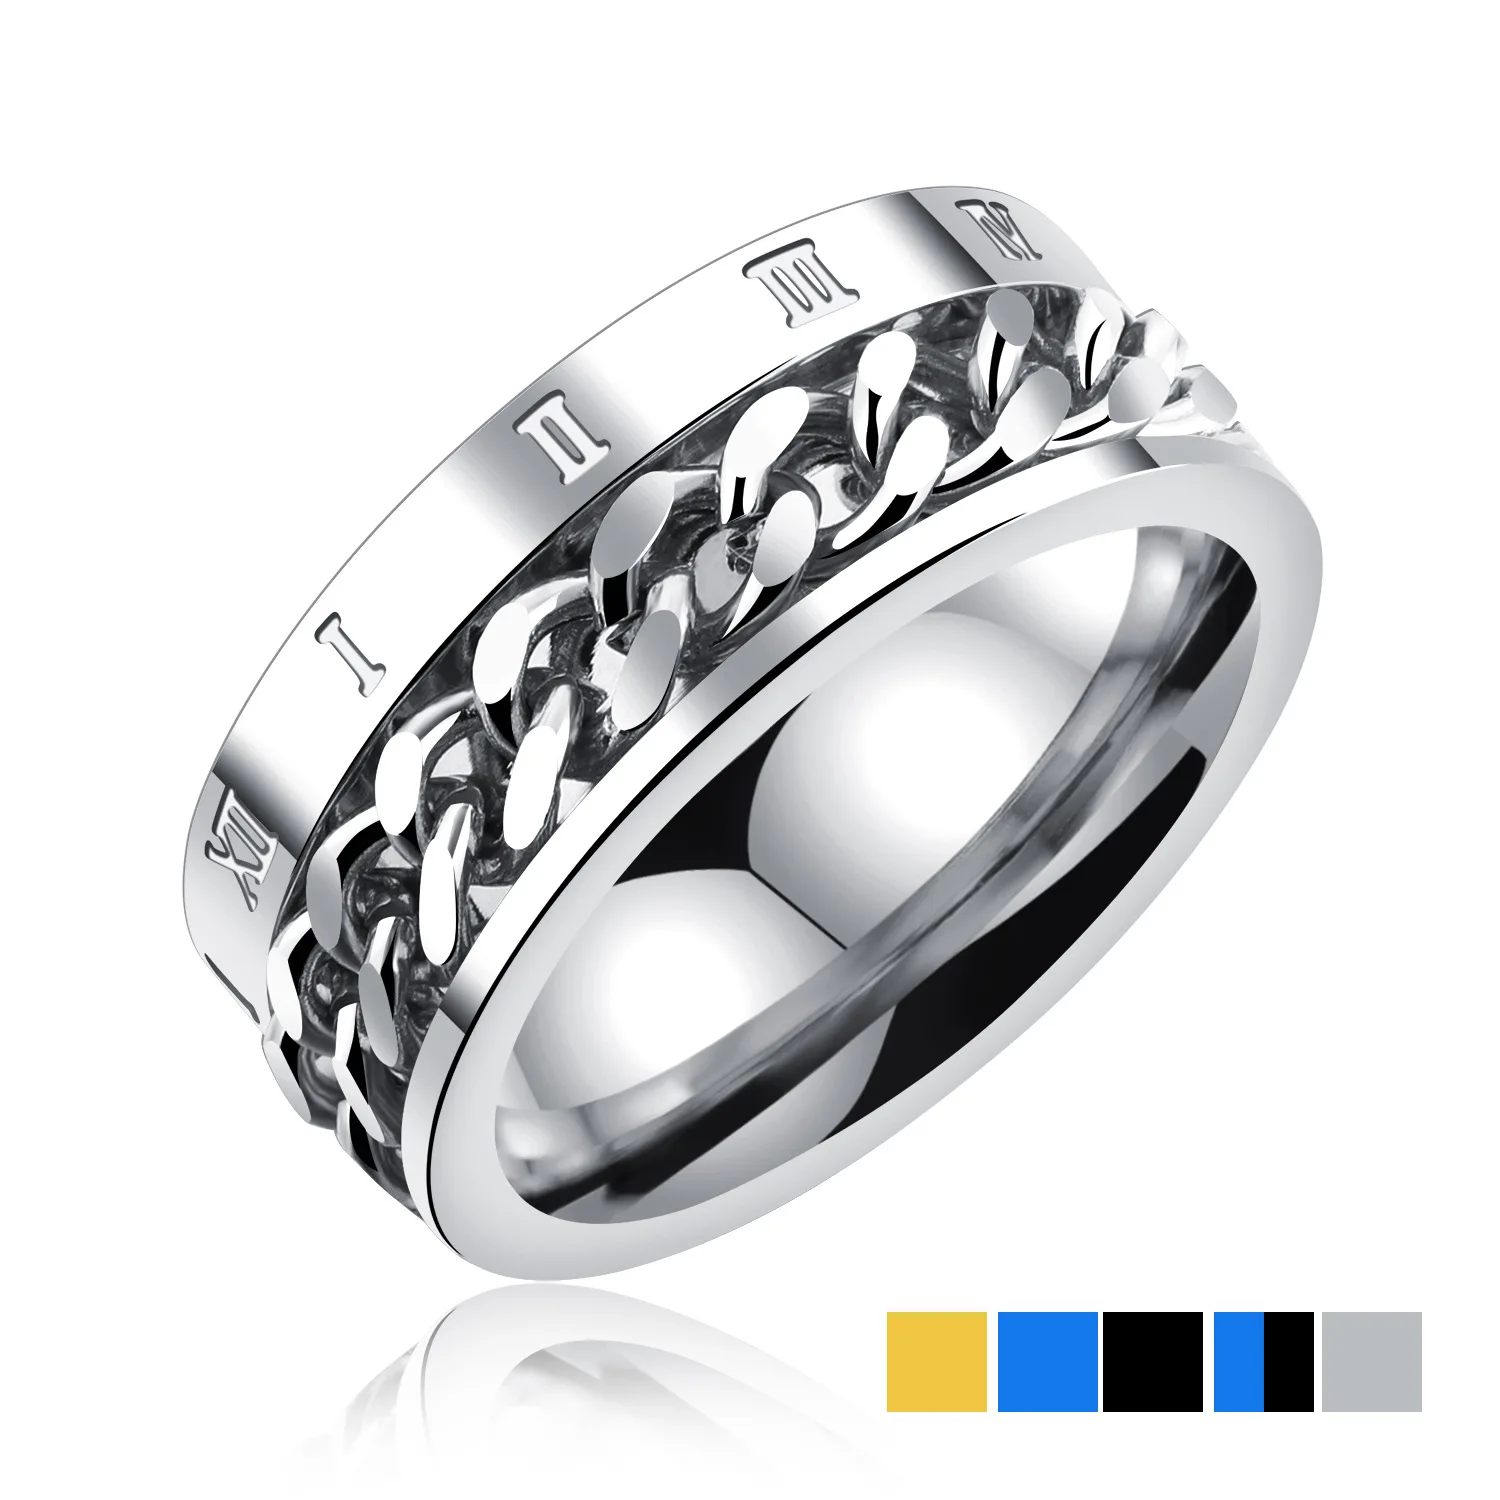 

Roman Numeral Ring Rotate Spinner Chain Link Men Rings Punk Rock Gold Blue Black Fashion Jewelry US Size 7-11